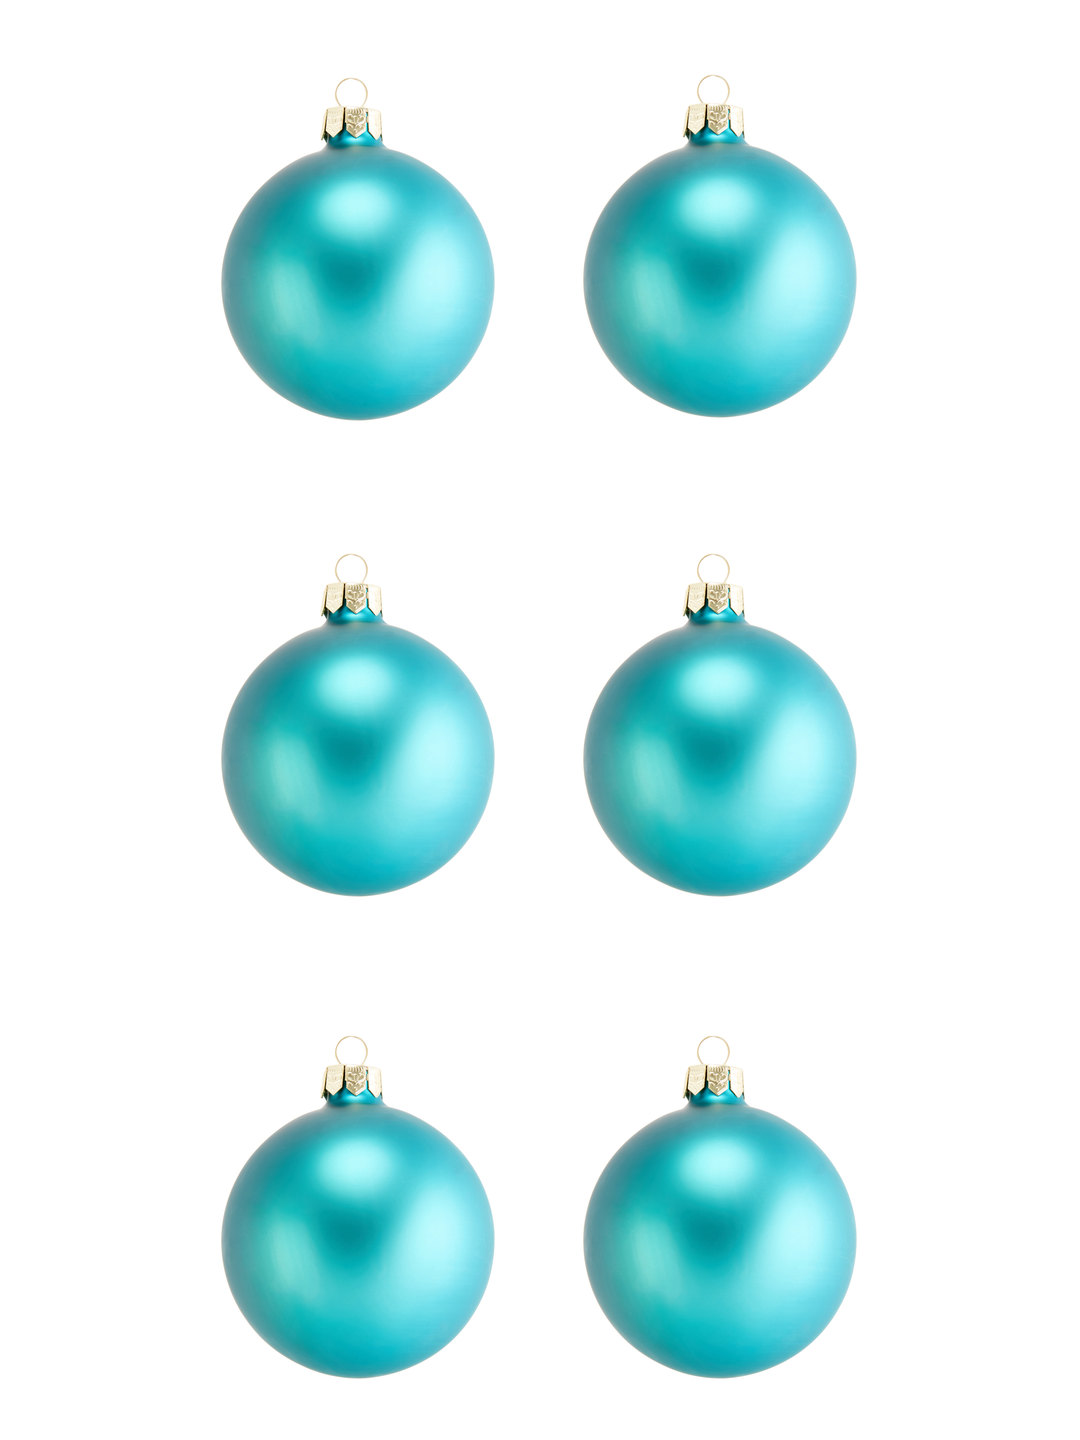 Turquoise Matte Solid Ornament Boxed Set